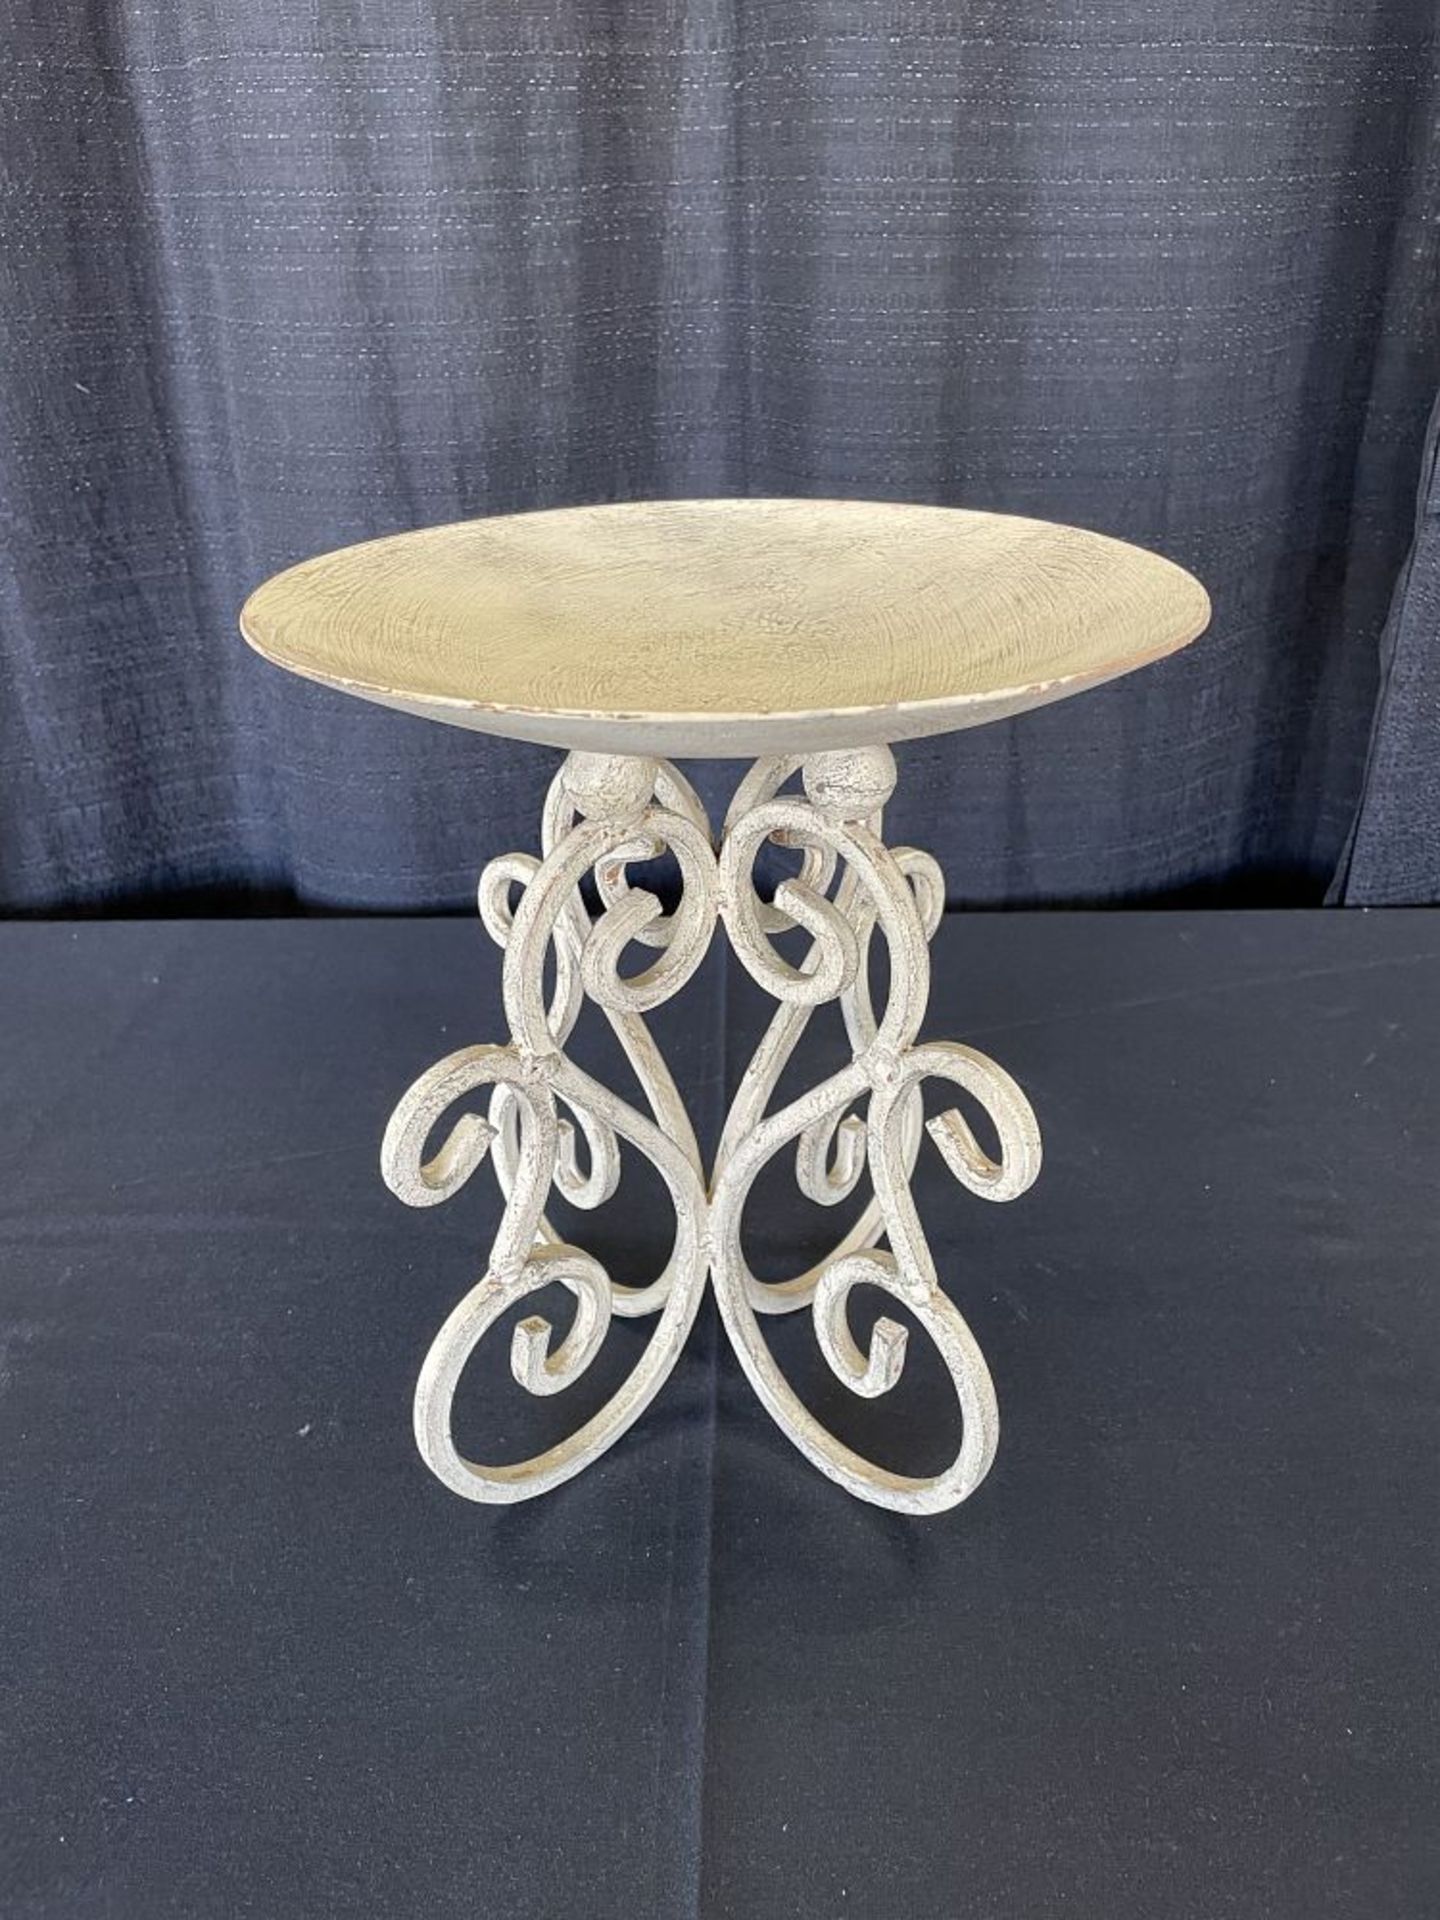 10x11.5 Iron Candle Stand, Cream